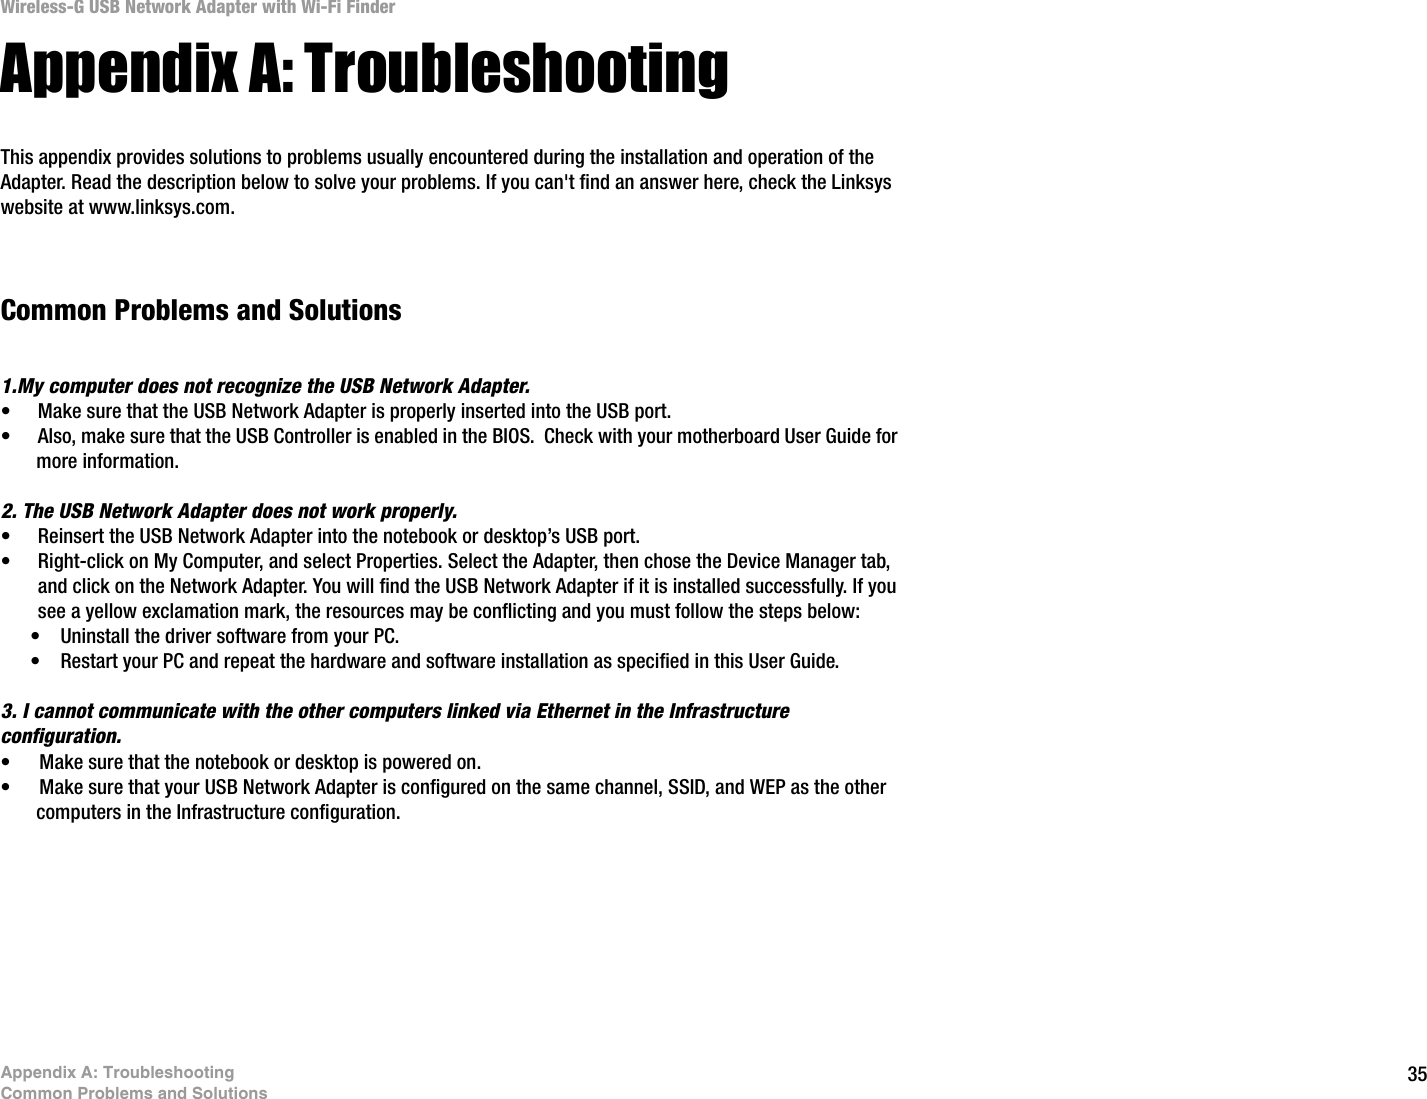 35Appendix A: TroubleshootingCommon Problems and SolutionsWireless-G USB Network Adapter with Wi-Fi FinderAppendix A: TroubleshootingThis appendix provides solutions to problems usually encountered during the installation and operation of the Adapter. Read the description below to solve your problems. If you can&apos;t find an answer here, check the Linksys website at www.linksys.com.Common Problems and Solutions1.My computer does not recognize the USB Network Adapter.• Make sure that the USB Network Adapter is properly inserted into the USB port.• Also, make sure that the USB Controller is enabled in the BIOS.  Check with your motherboard User Guide for more information.2. The USB Network Adapter does not work properly.• Reinsert the USB Network Adapter into the notebook or desktop’s USB port. • Right-click on My Computer, and select Properties. Select the Adapter, then chose the Device Manager tab, and click on the Network Adapter. You will find the USB Network Adapter if it is installed successfully. If you see a yellow exclamation mark, the resources may be conflicting and you must follow the steps below:• Uninstall the driver software from your PC.• Restart your PC and repeat the hardware and software installation as specified in this User Guide.3. I cannot communicate with the other computers linked via Ethernet in the Infrastructure configuration.• Make sure that the notebook or desktop is powered on.• Make sure that your USB Network Adapter is configured on the same channel, SSID, and WEP as the other computers in the Infrastructure configuration. 